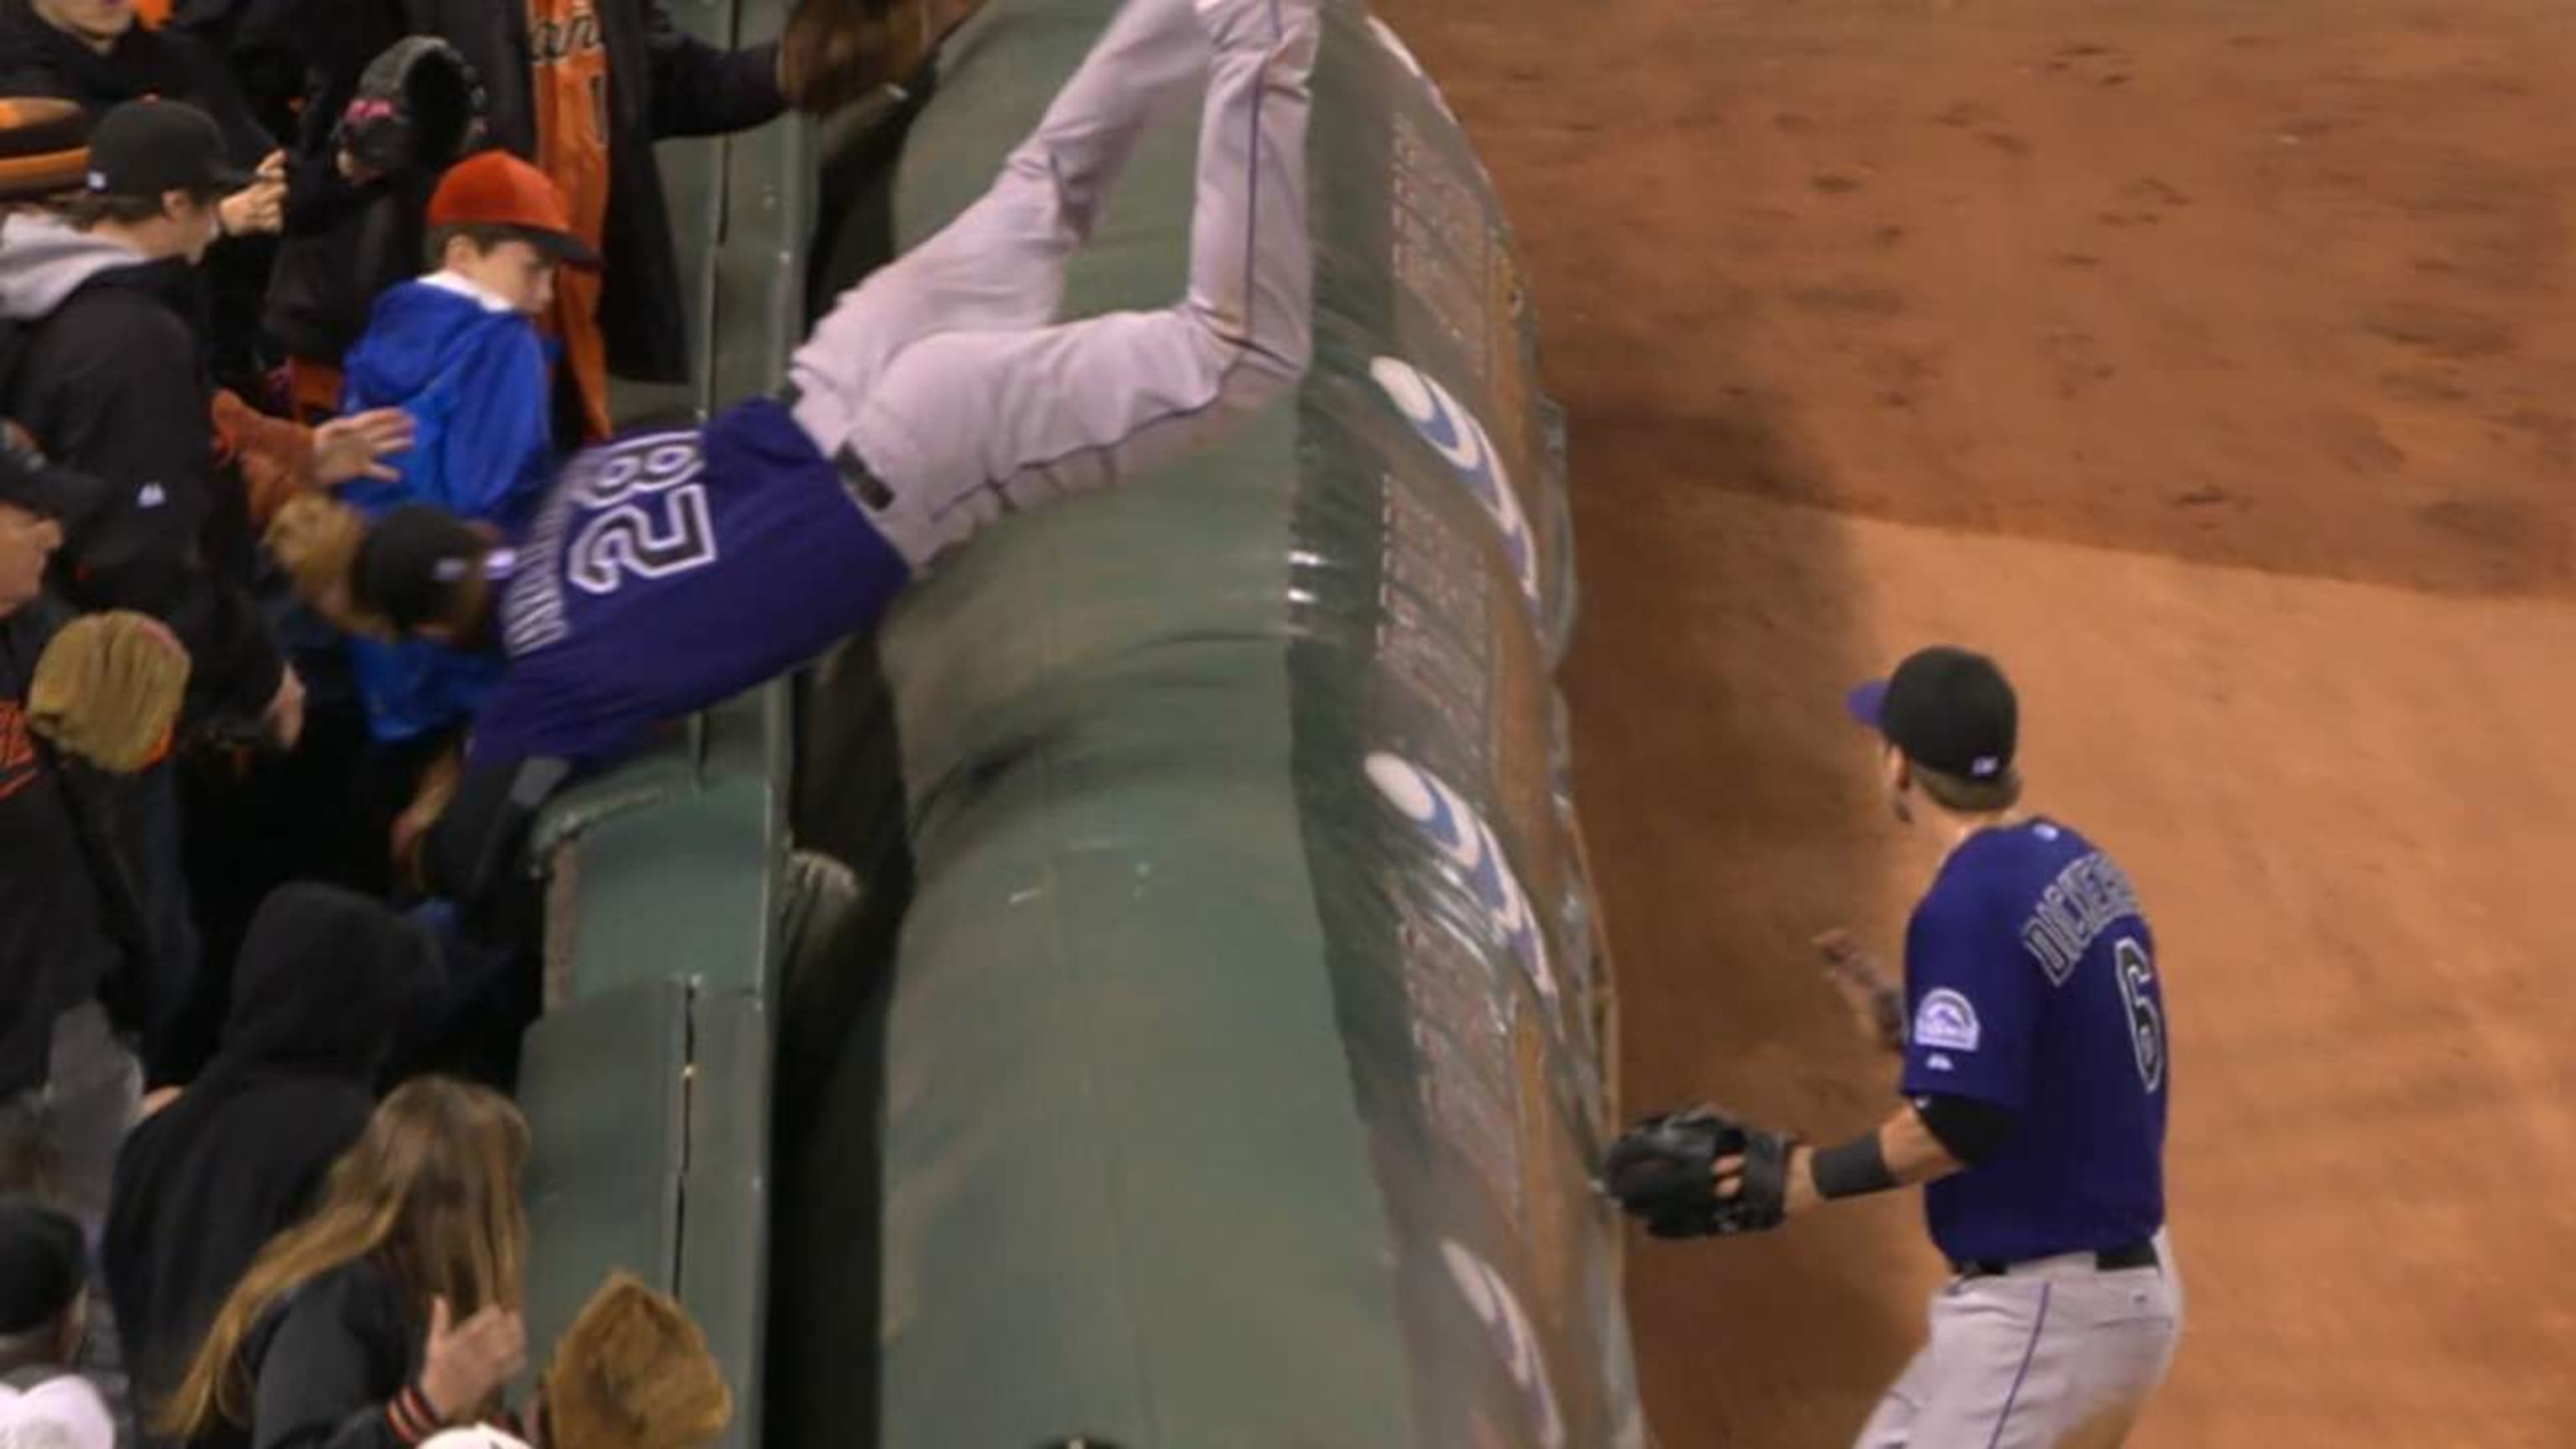 Nolan Arenado's Greatest Hits (and Throws): The superstar's 10